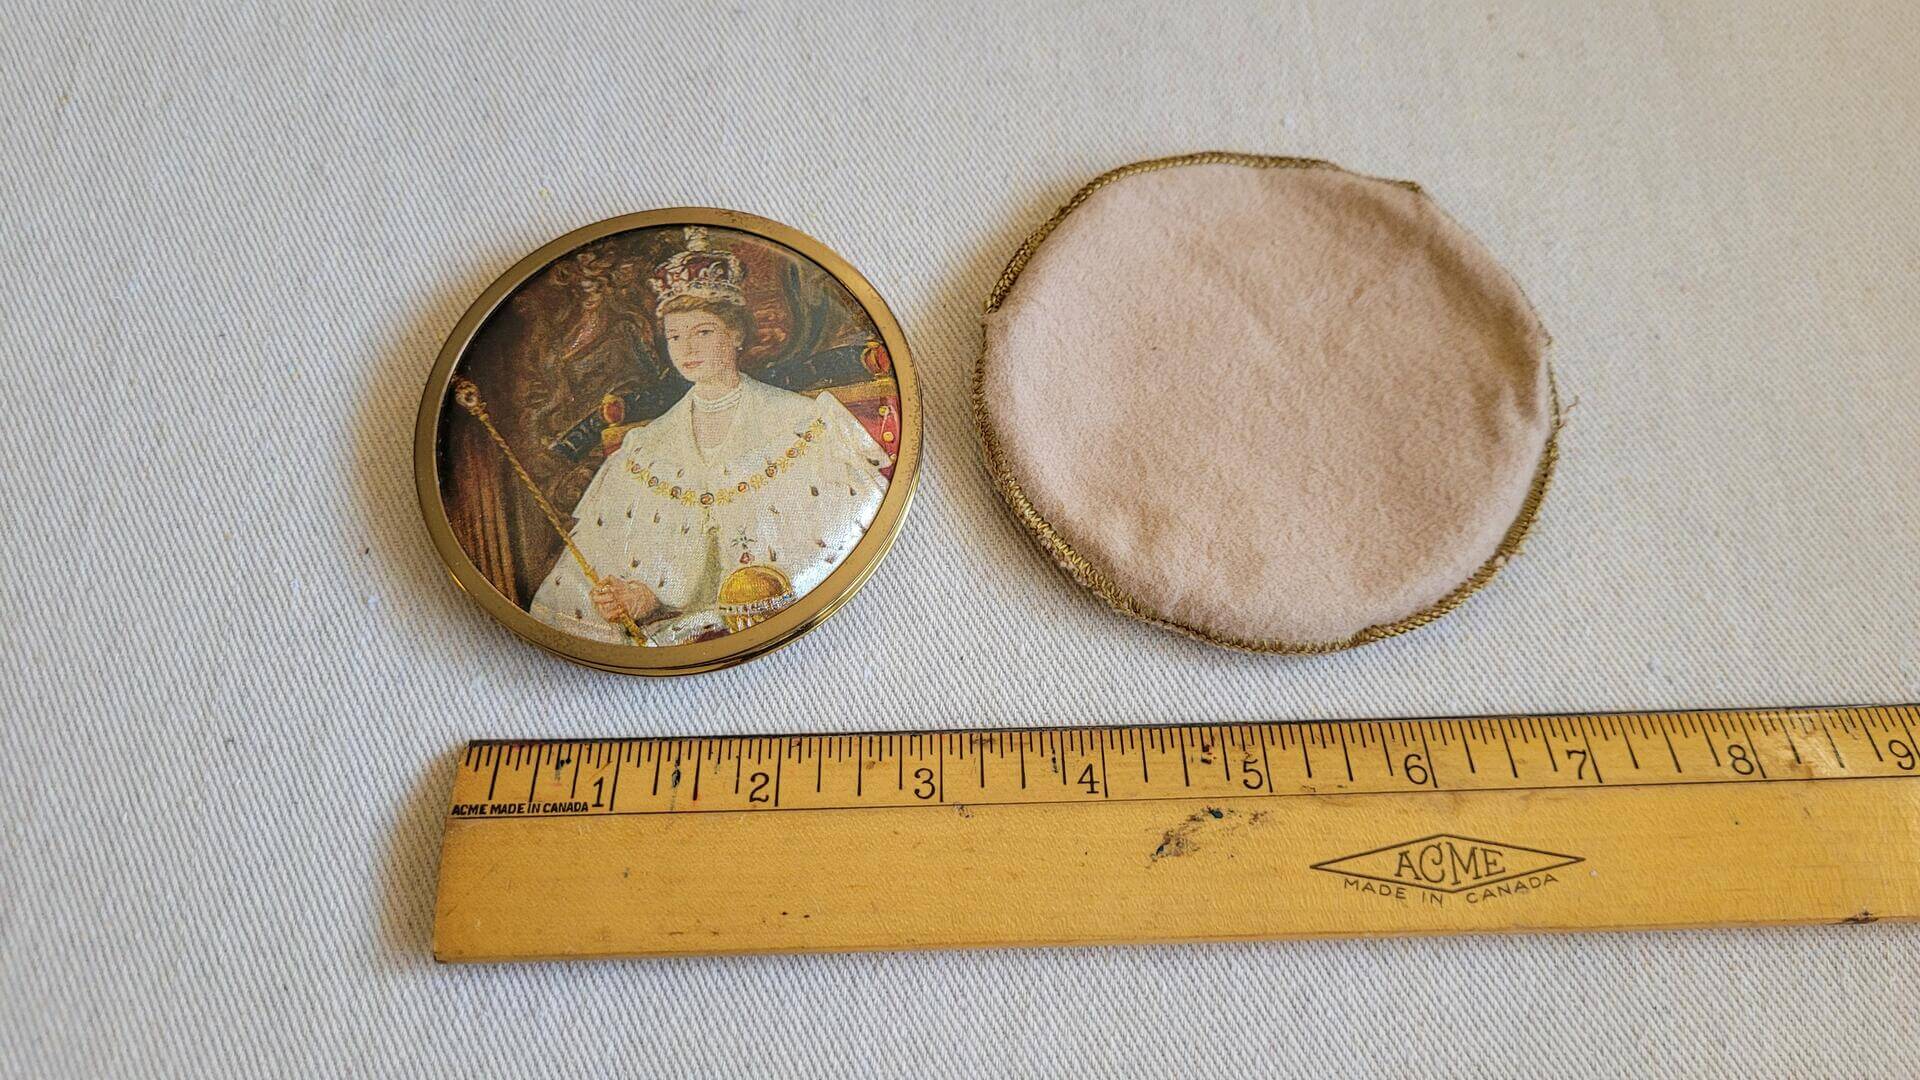 Vintage brass Pygmalion powder compact with the image of Queen Elizabeth II wearing the crown. Rare made in England compact and mid century MCM vanity cosmetics collectible